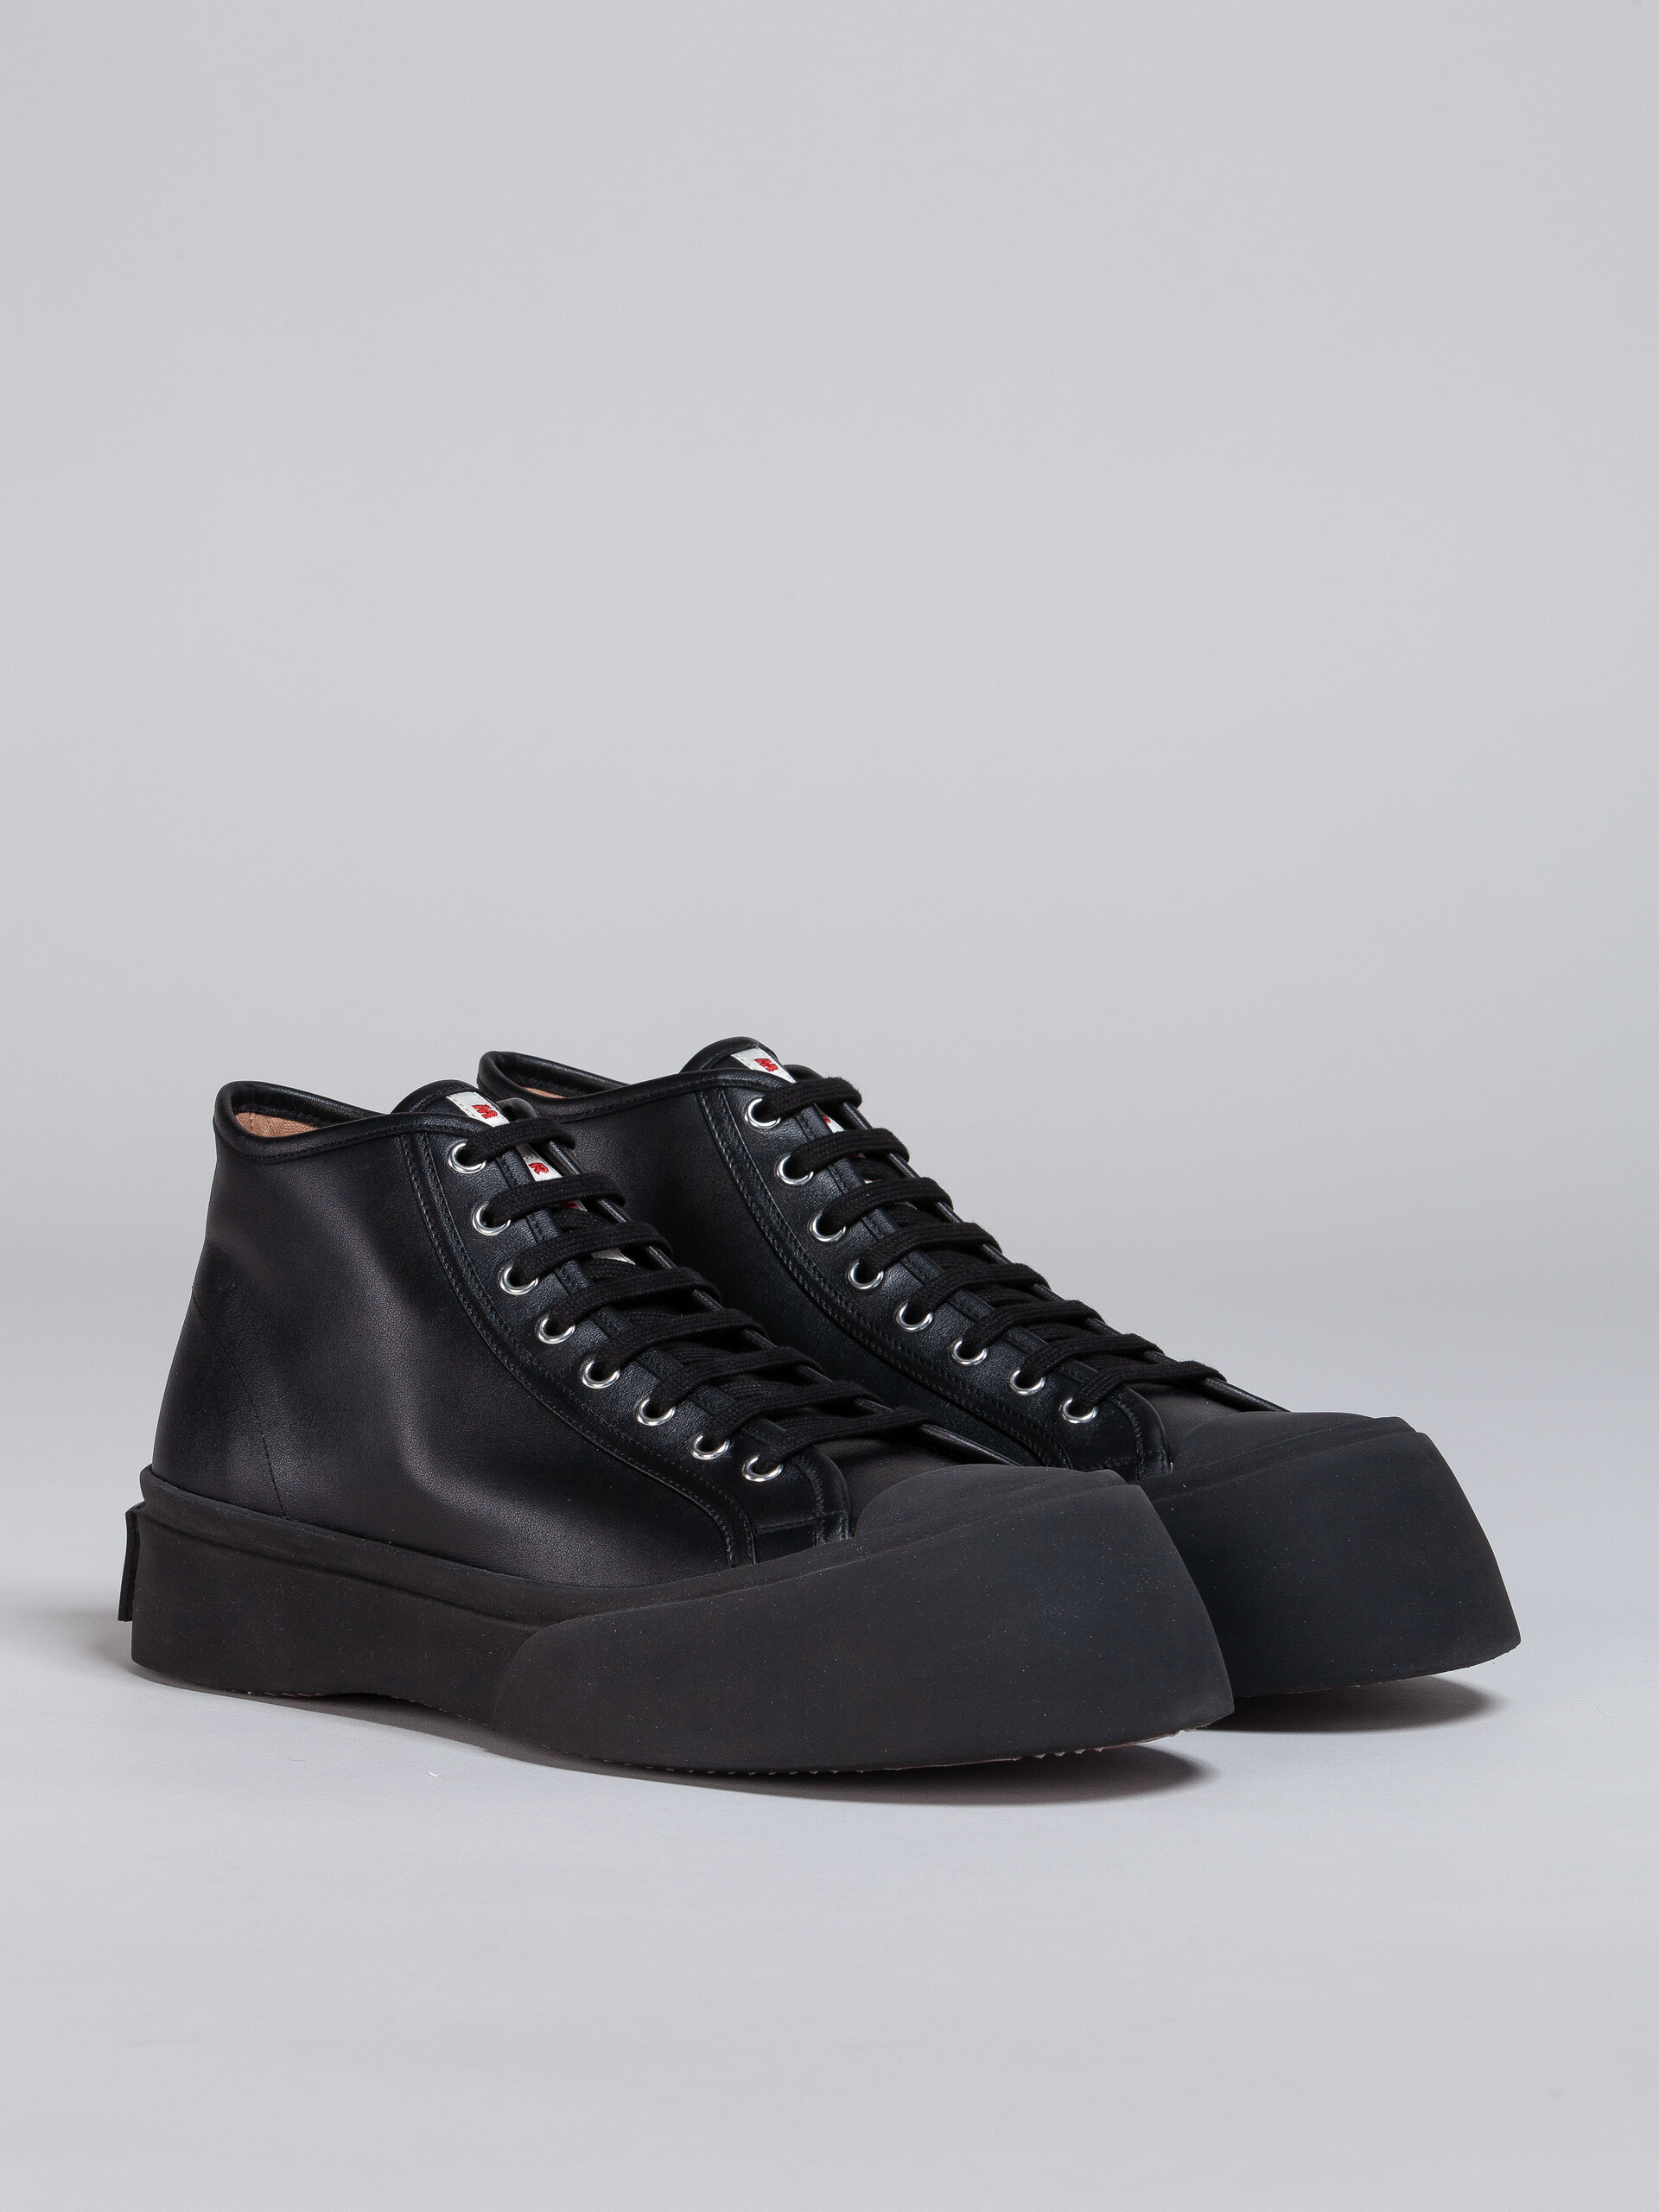 Black leather PABLO high-top  sneaker - Sneakers - Image 2